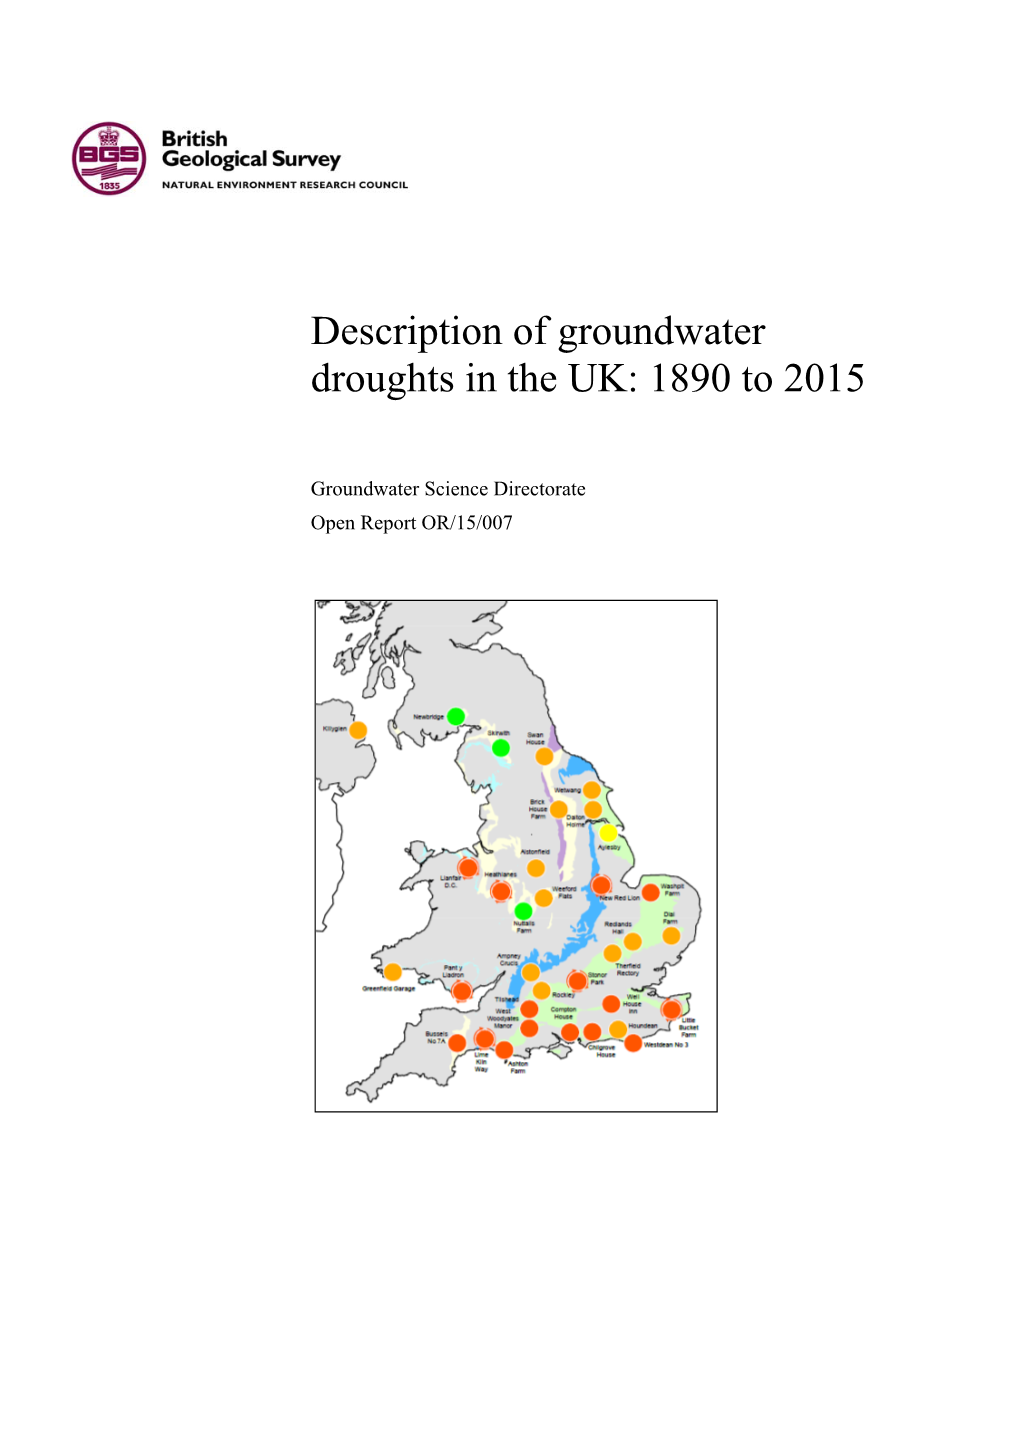 Description of Groundwater Droughts in the UK: 1890 to 2015